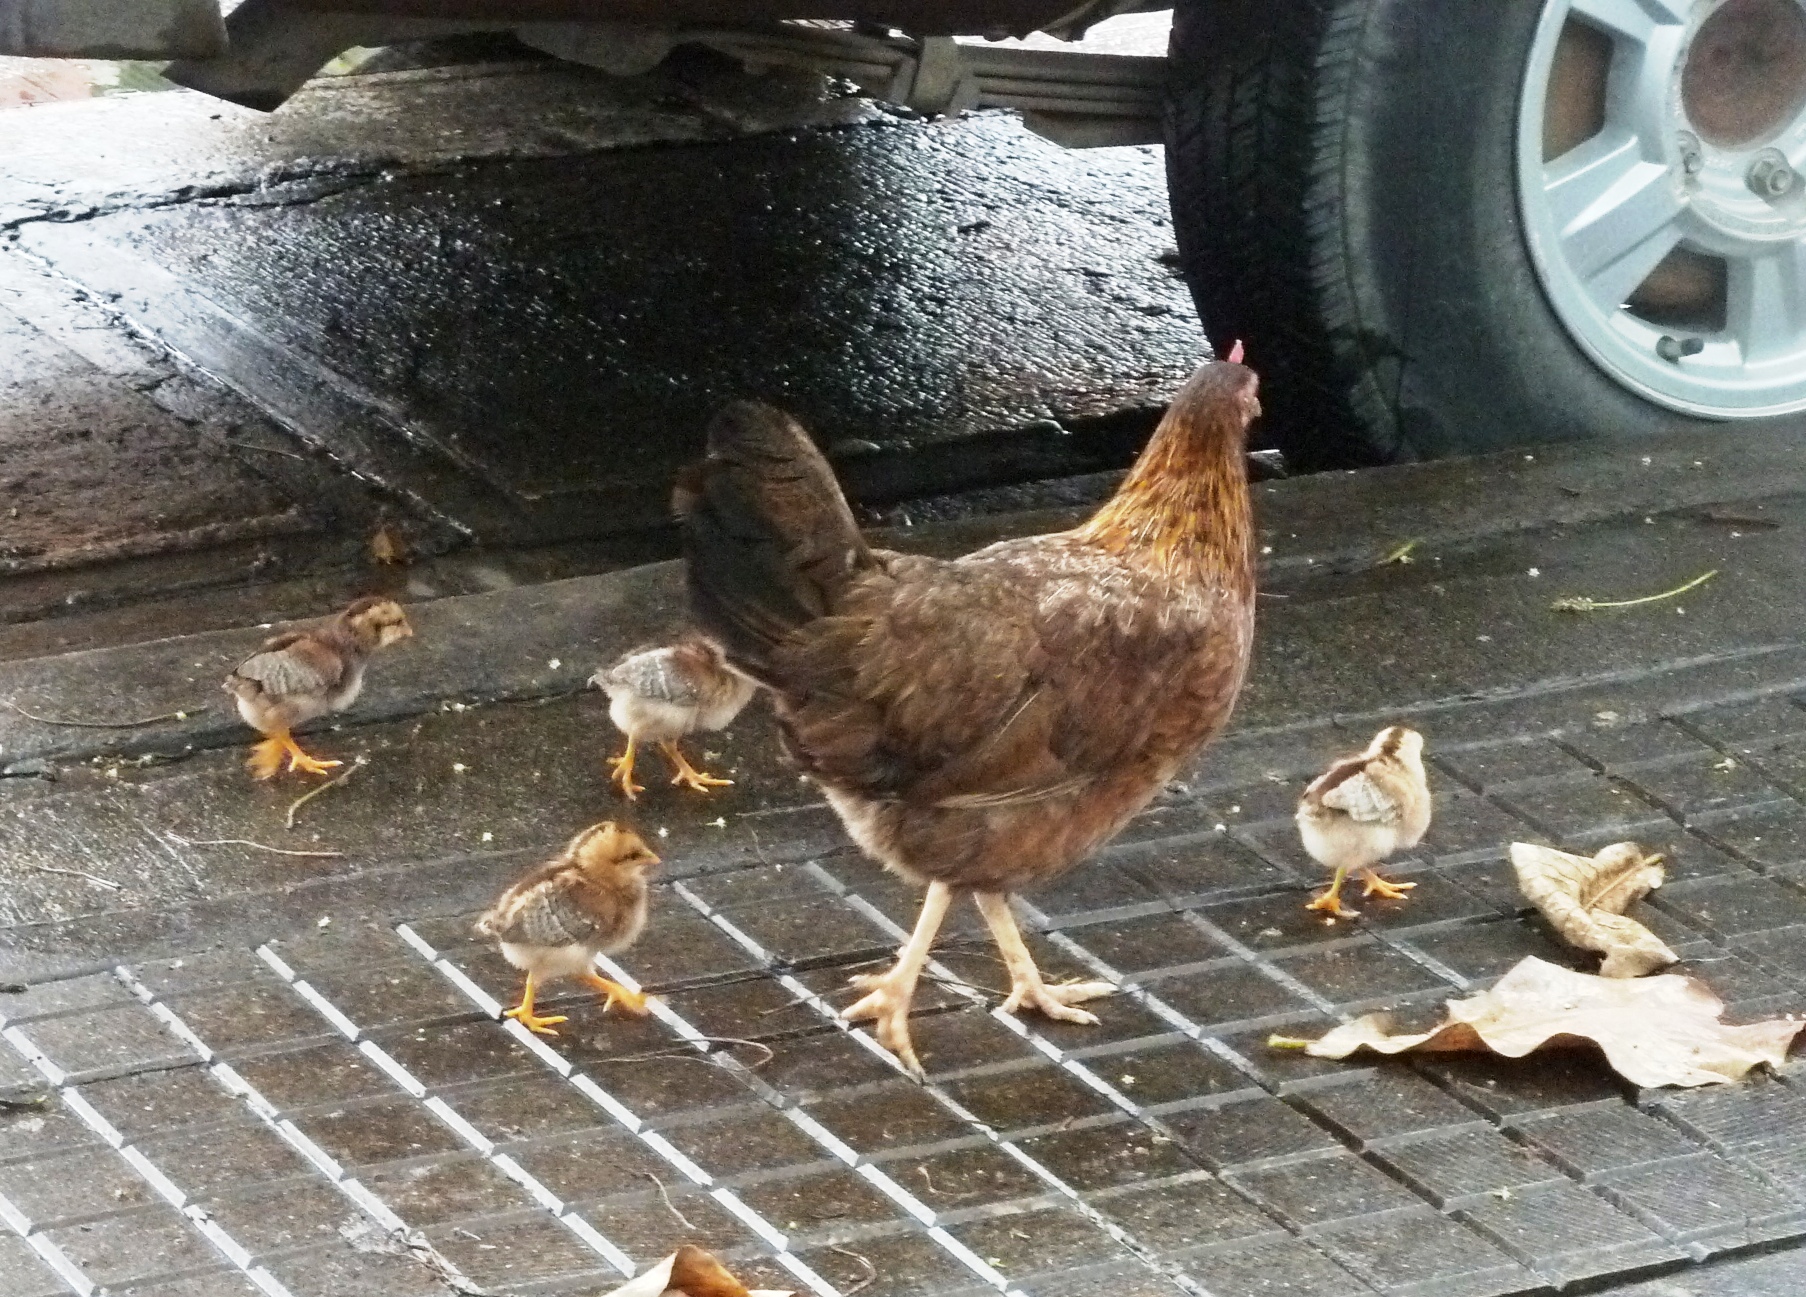 chickens are huddled together on a walkway in front of a car